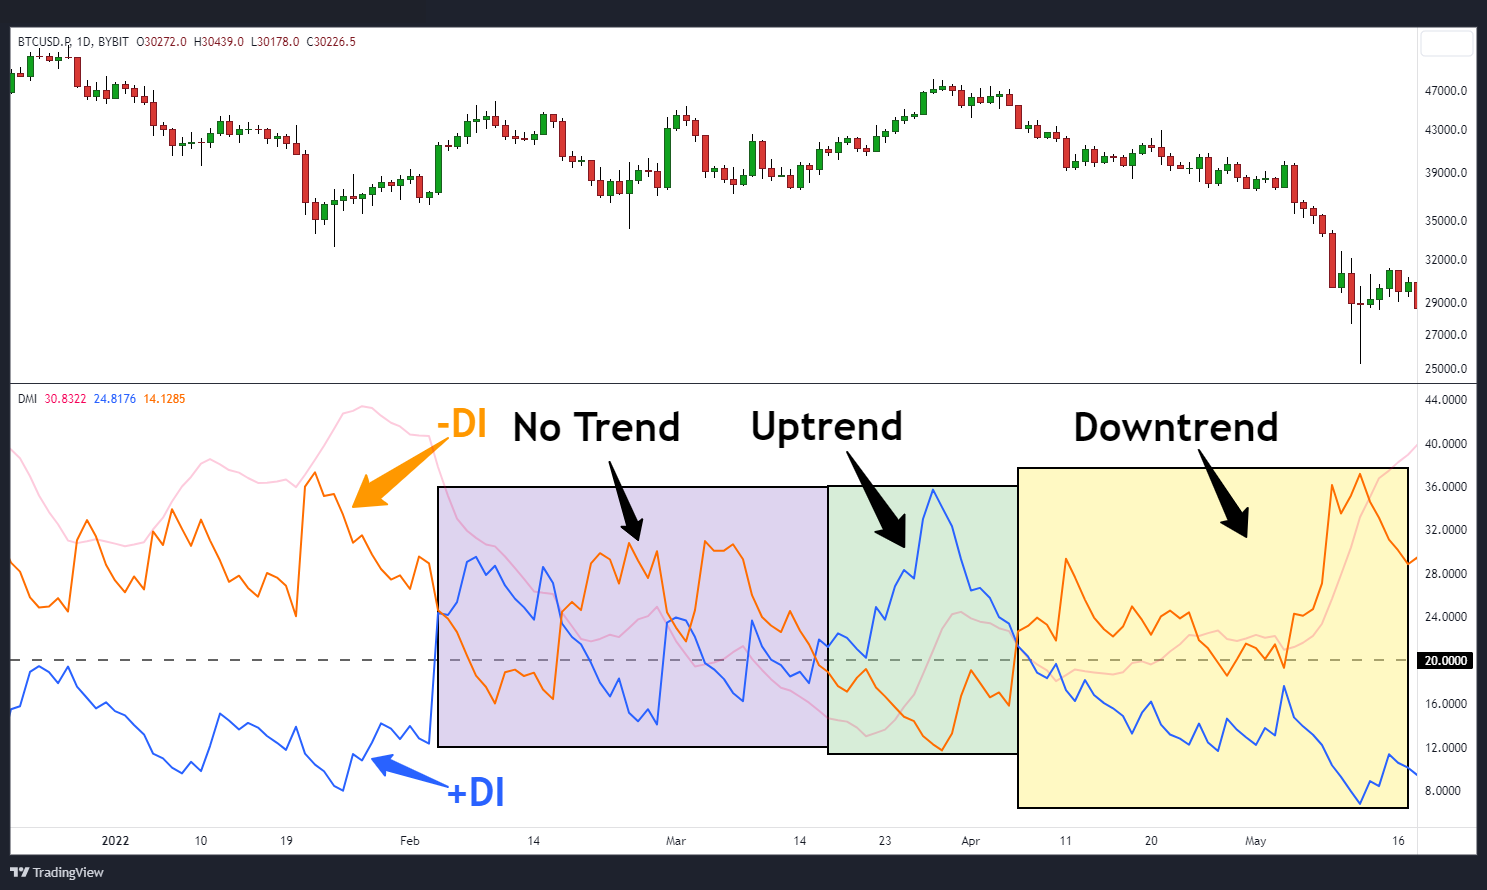 Directional indicators in range market, uptrend and downtrend.